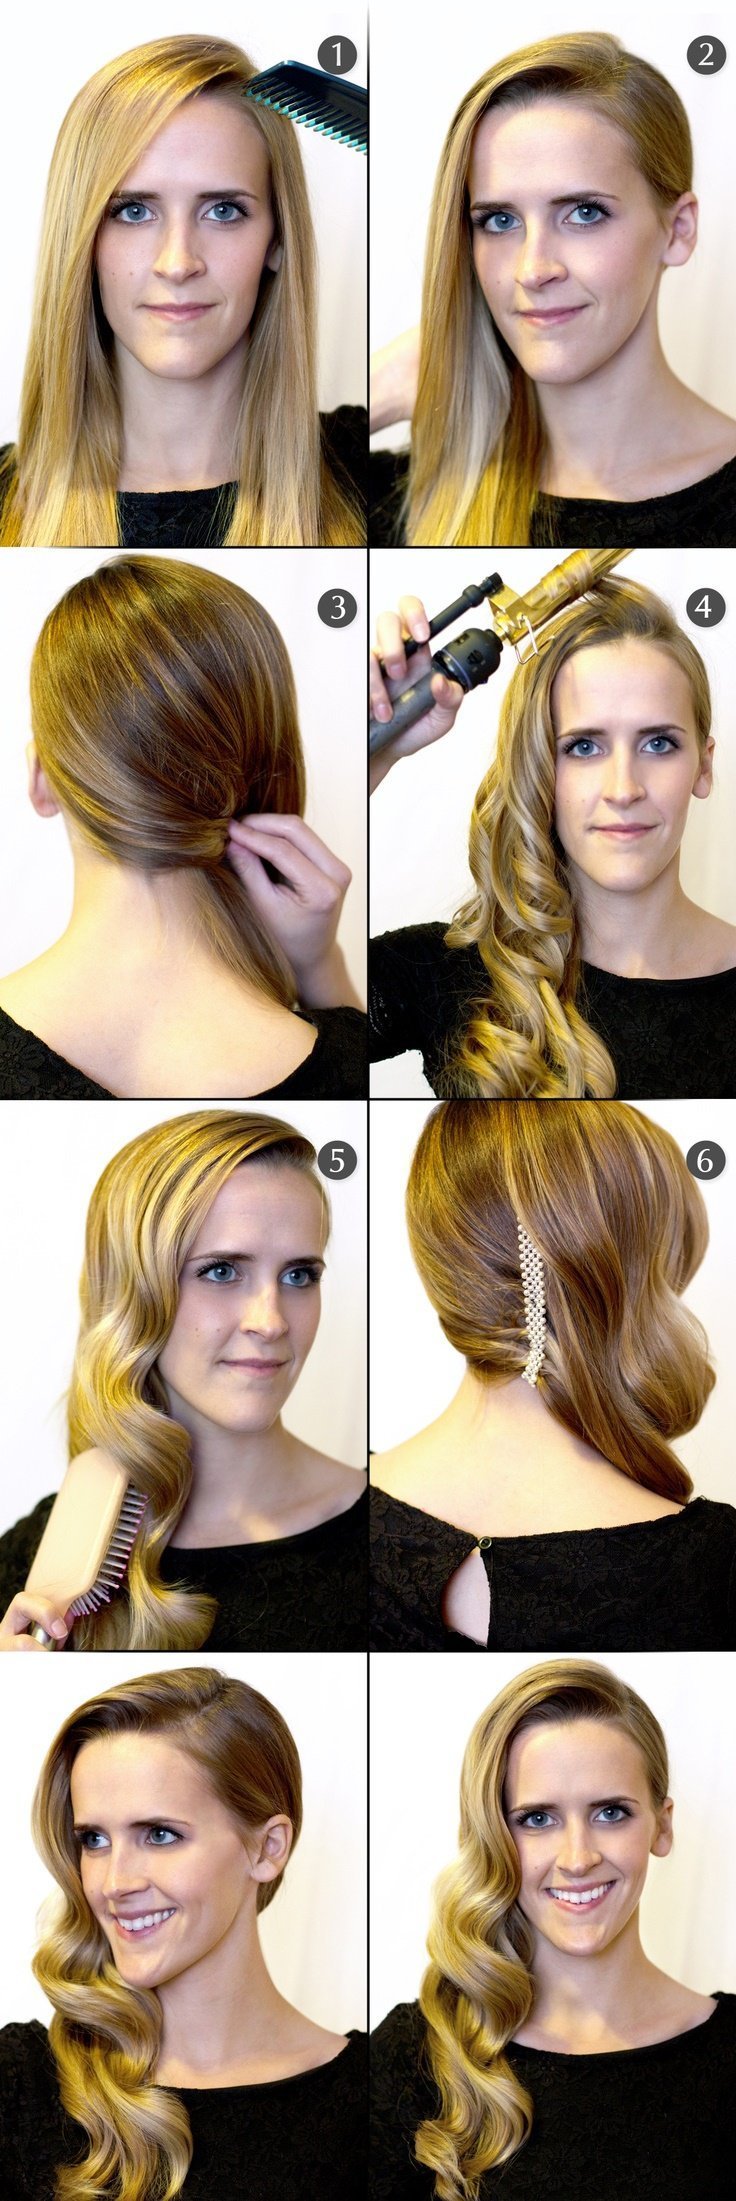 12 Easy Hairstyles For Girls | 12 Daily Simple Hairstyles For Girls